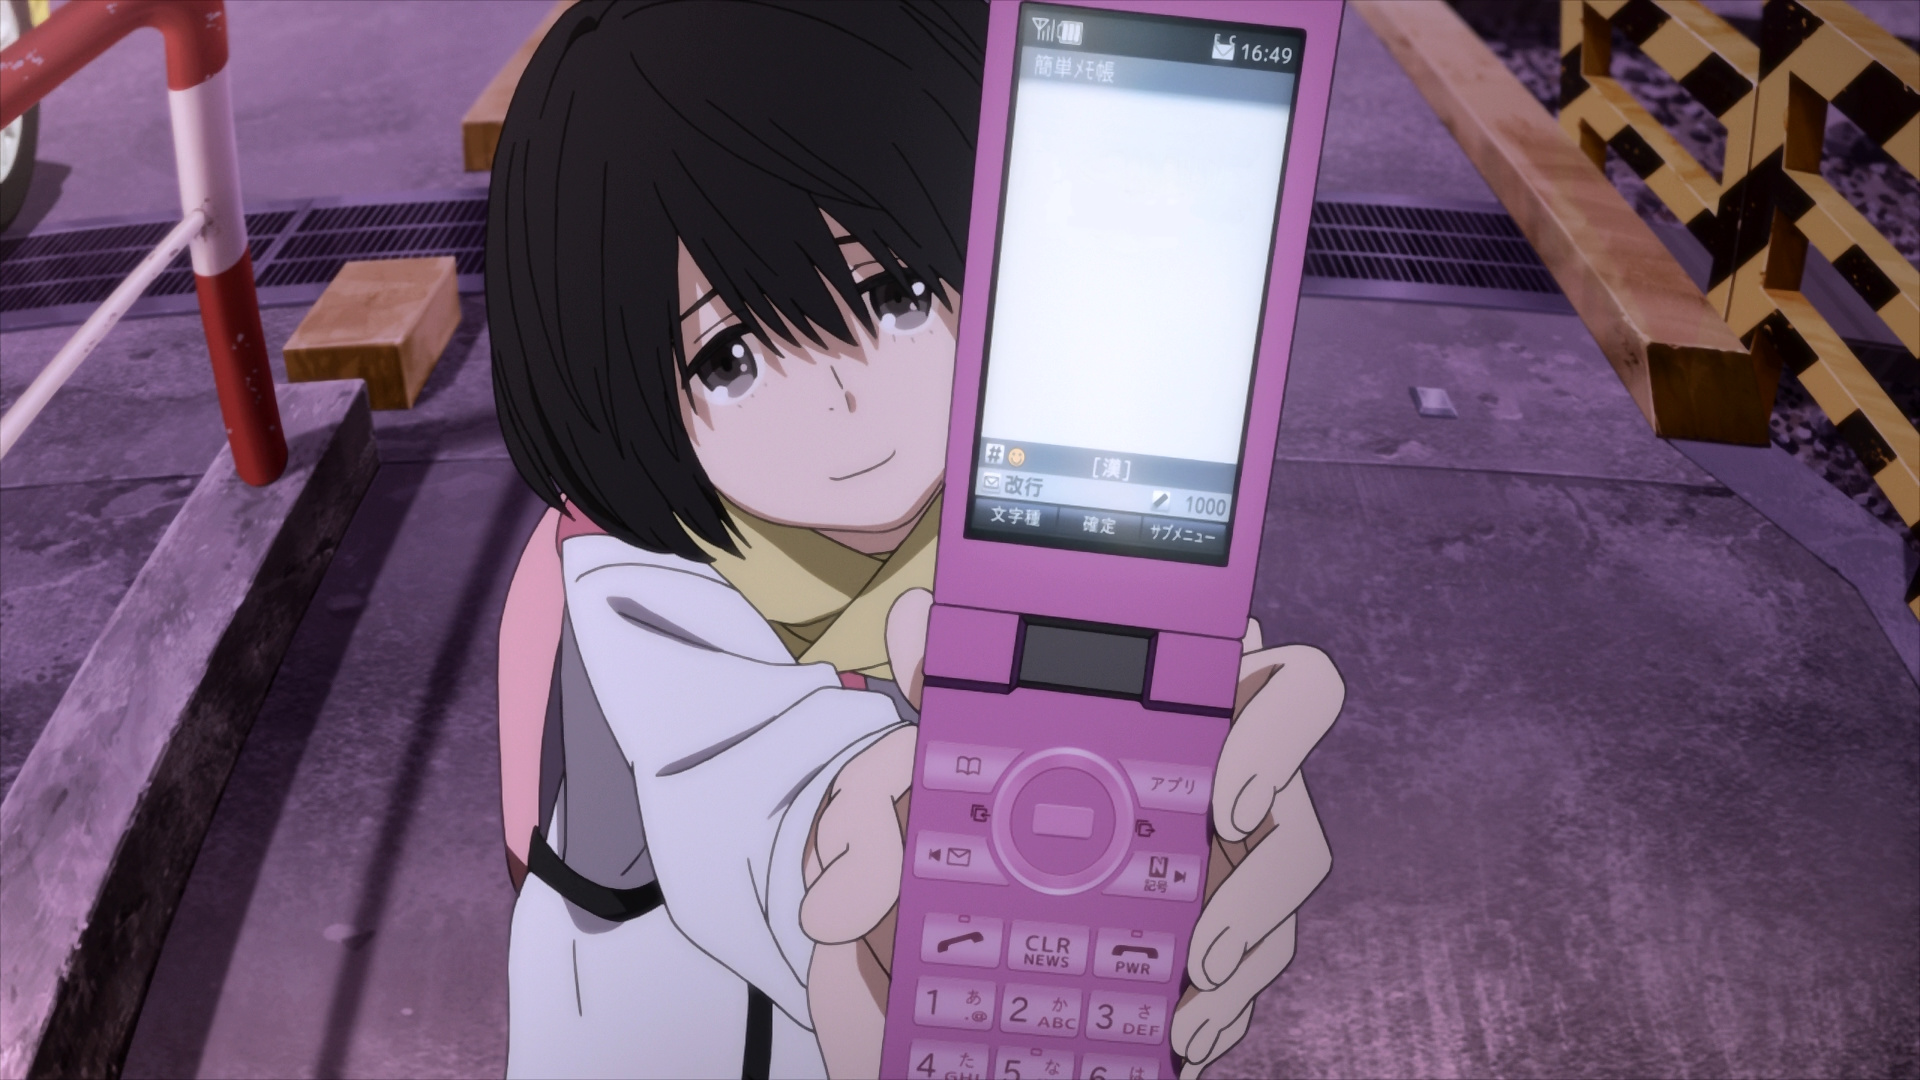 The Anthem of the Heart: Jun Naruse, Communicates by sending messages through her cellphone. 1920x1080 Full HD Wallpaper.